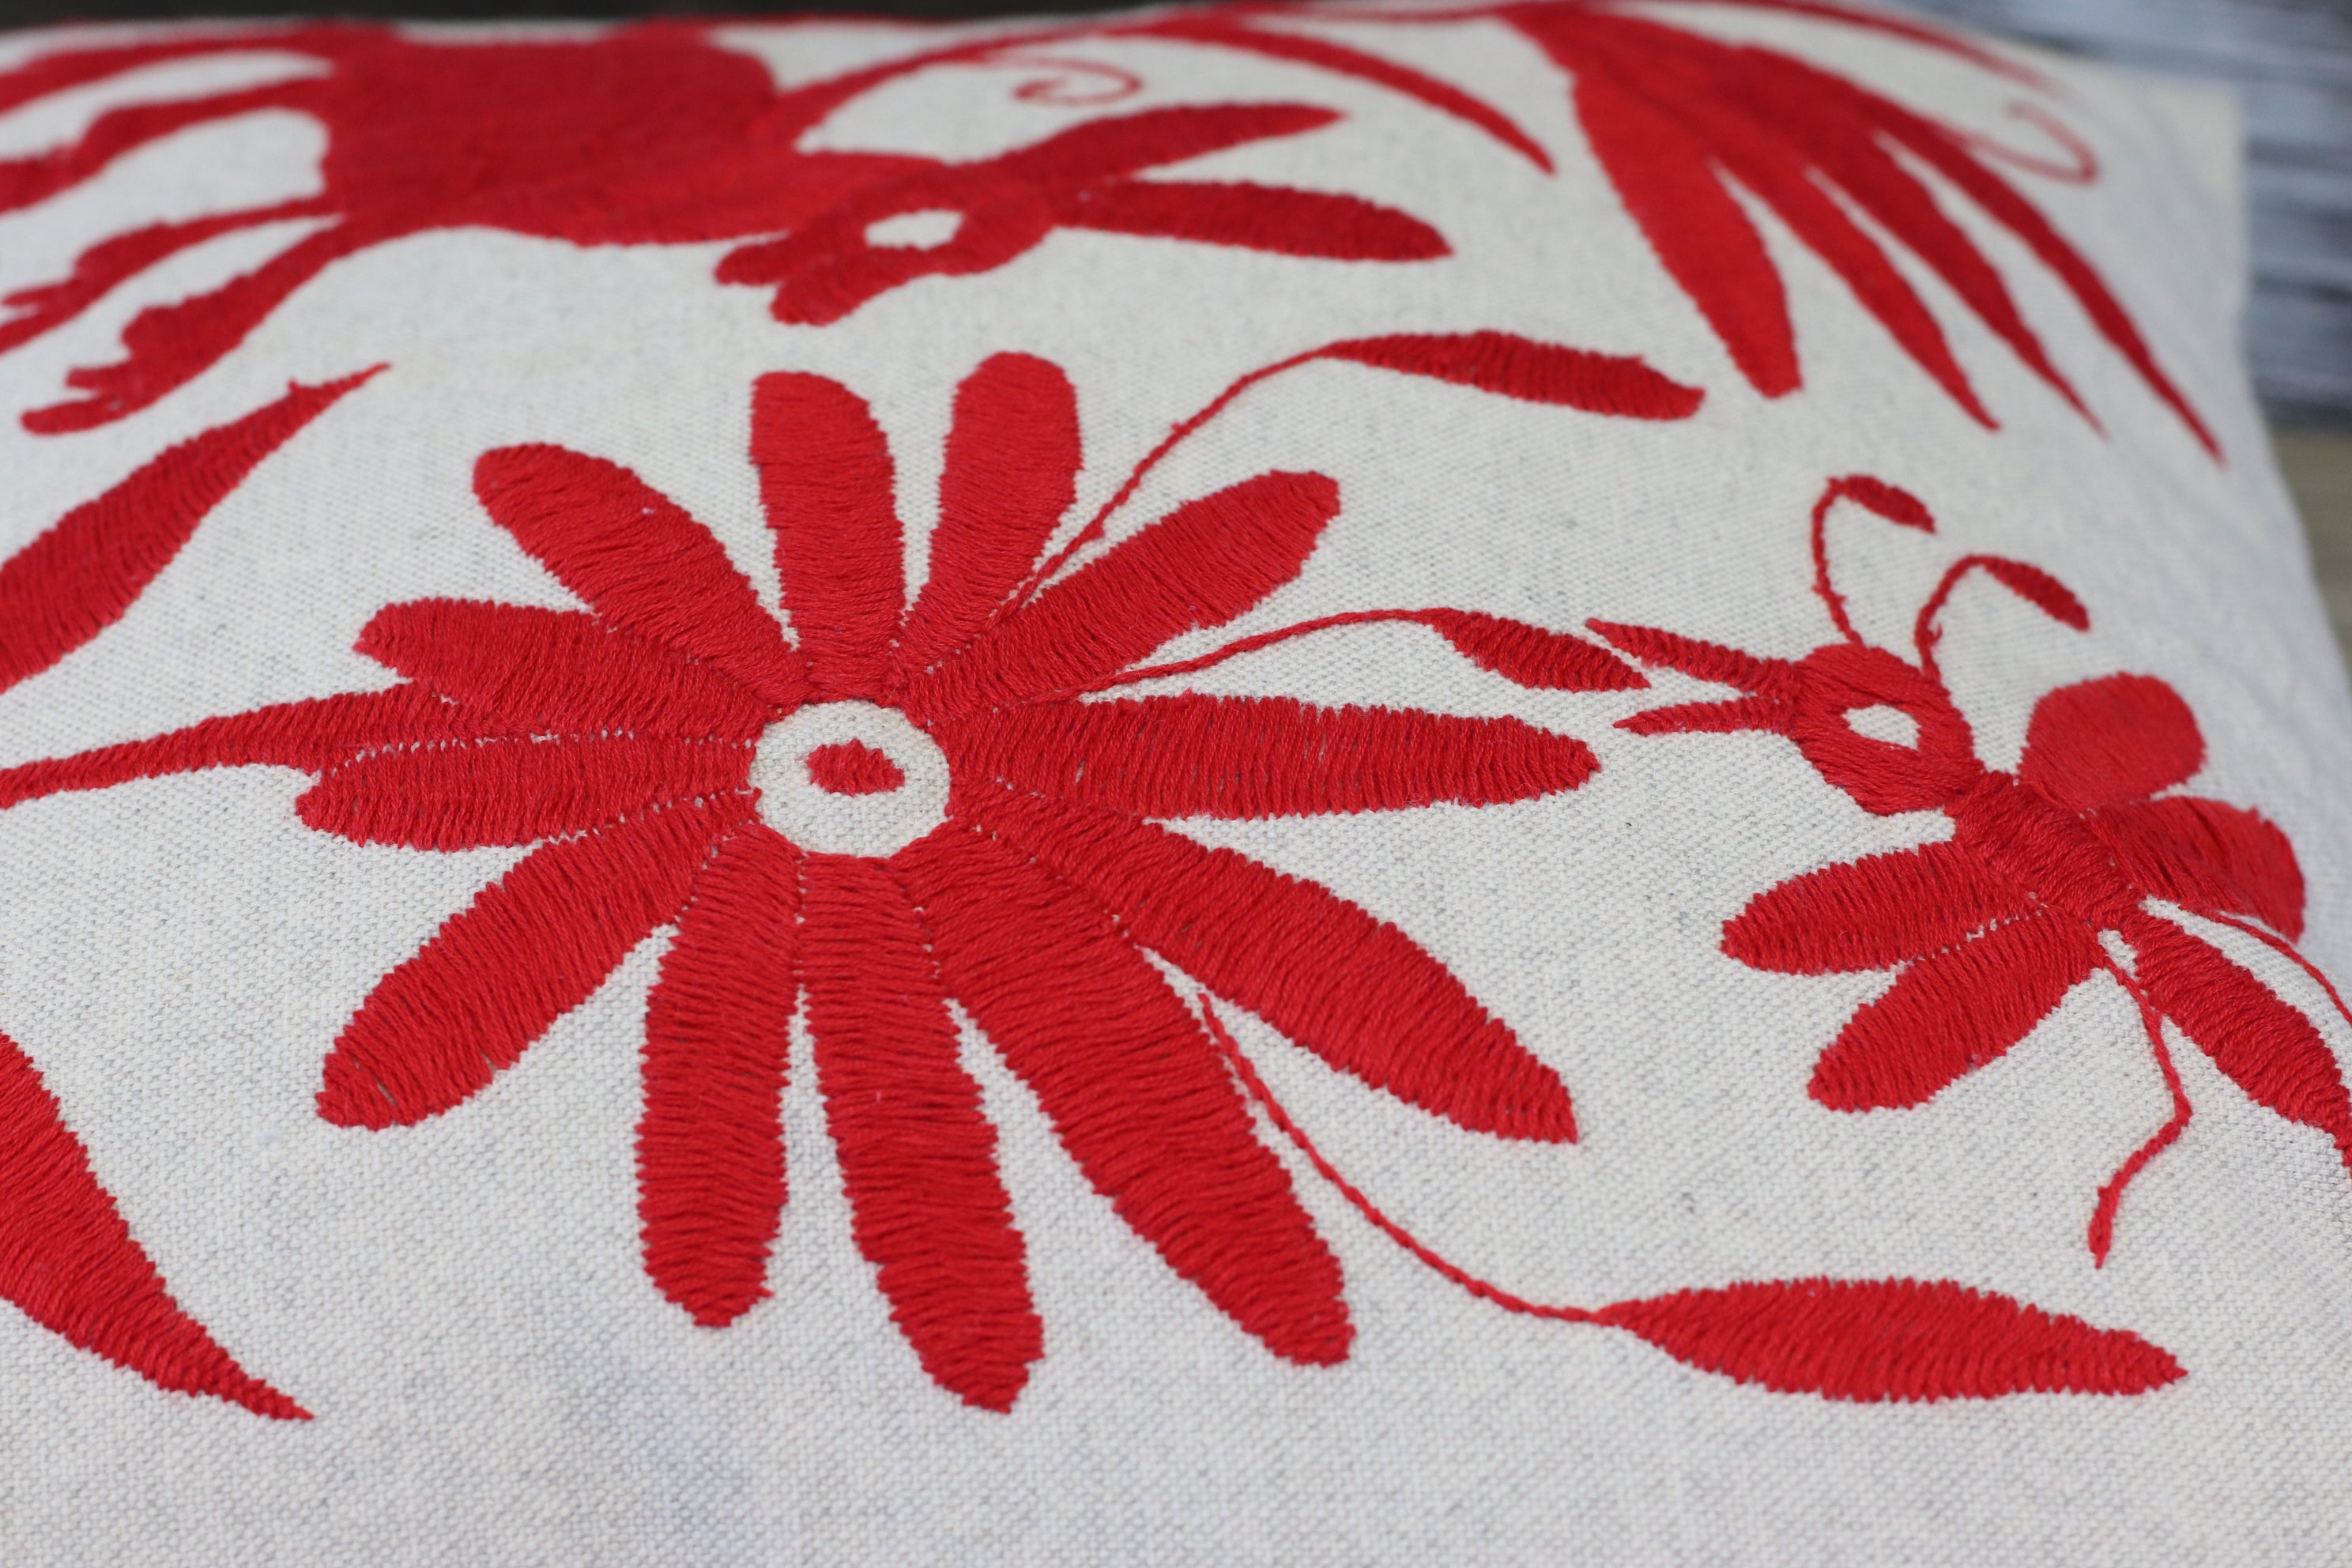 Red Embroidered Linen Pillow Cover. Handmade and Hand Embroidered in Mexico. Ships from the USA. Buy now at www.felipeandgrace.com.